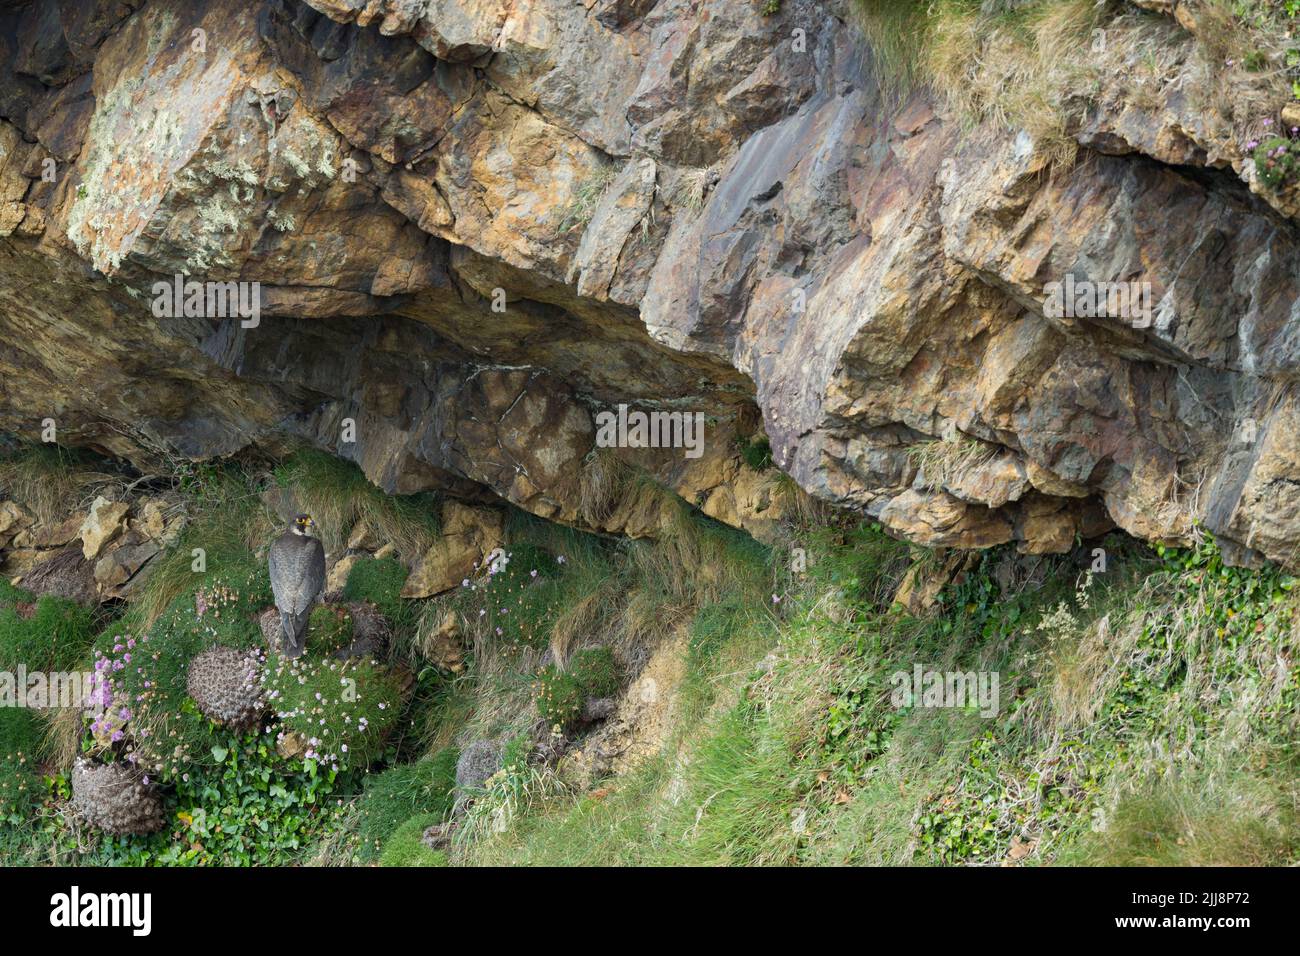 Peregrine falcon Falco peregrinus, adult perched under cliff overhang, Ramsey Island, Pembrokeshire, Wales, UK, June Stock Photo